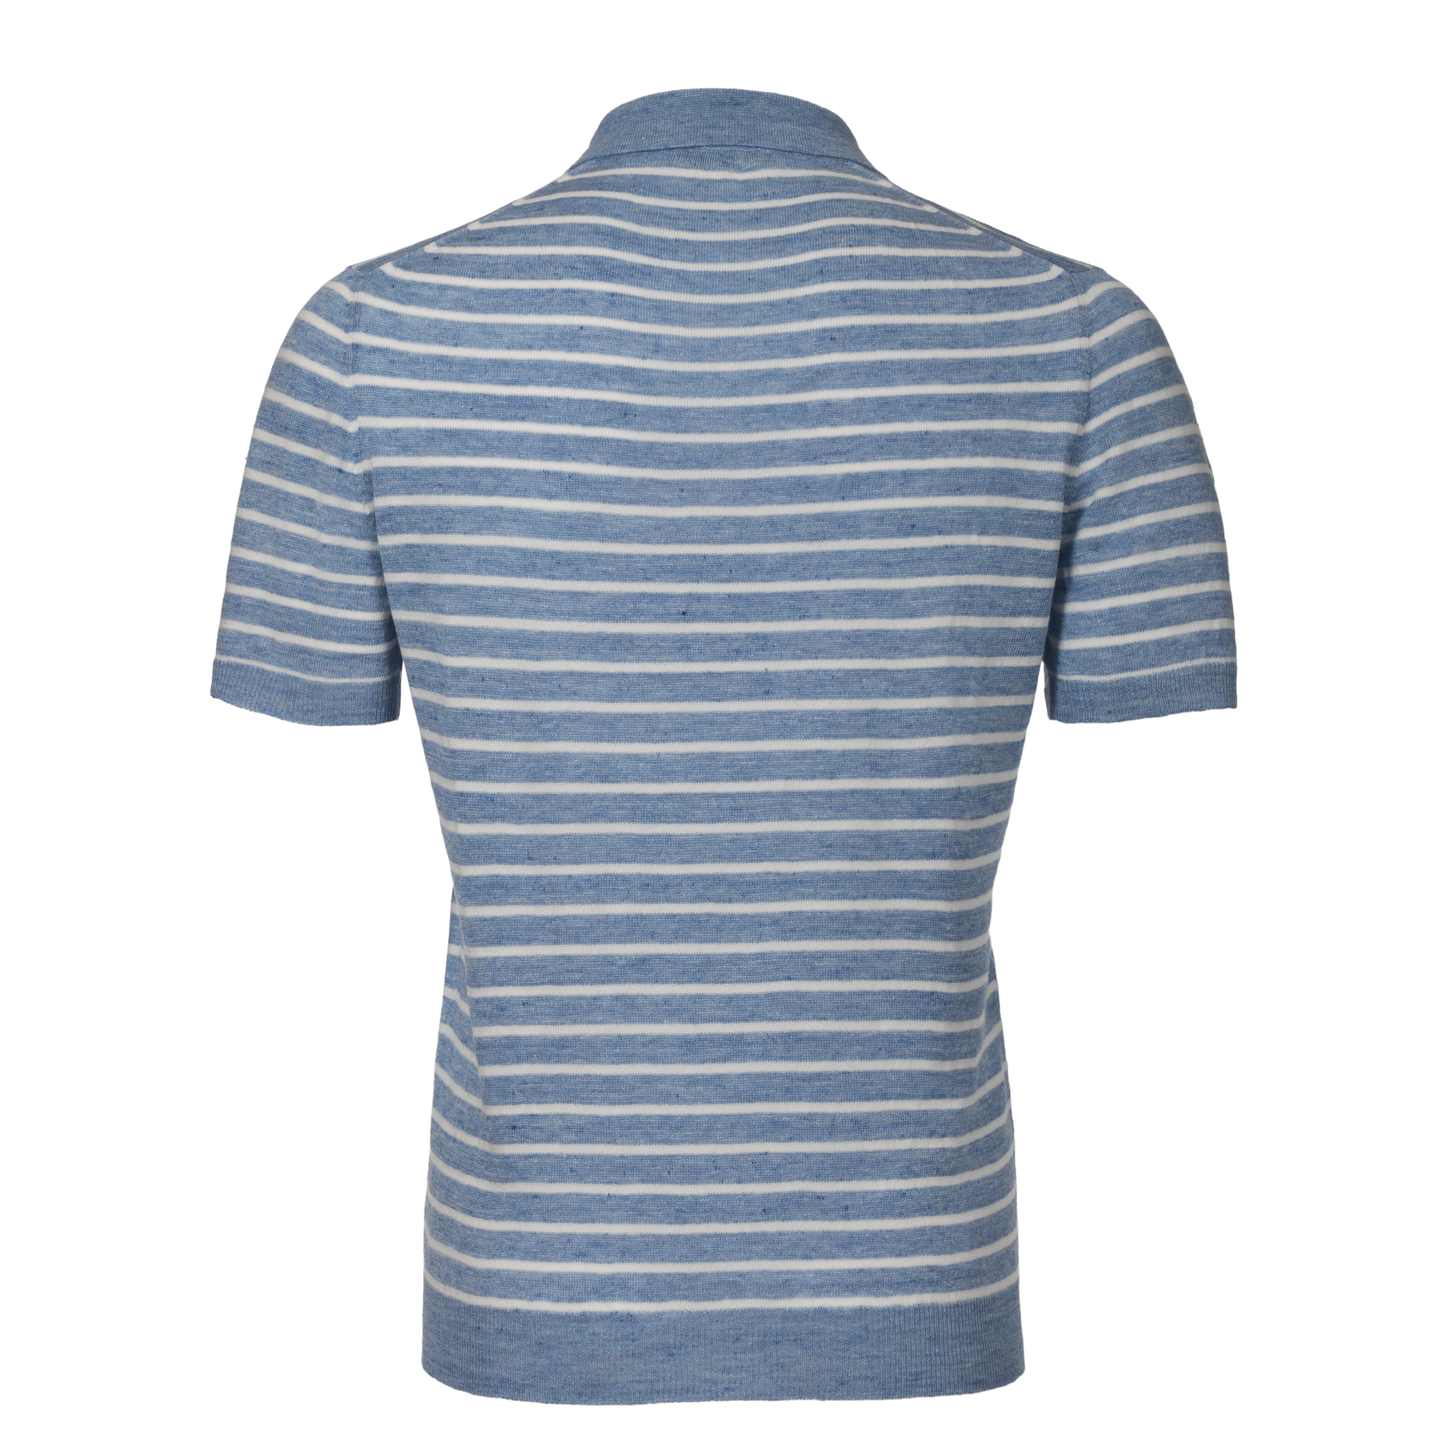 Striped Cotton-Blend Polo Shirt in Sky Blue